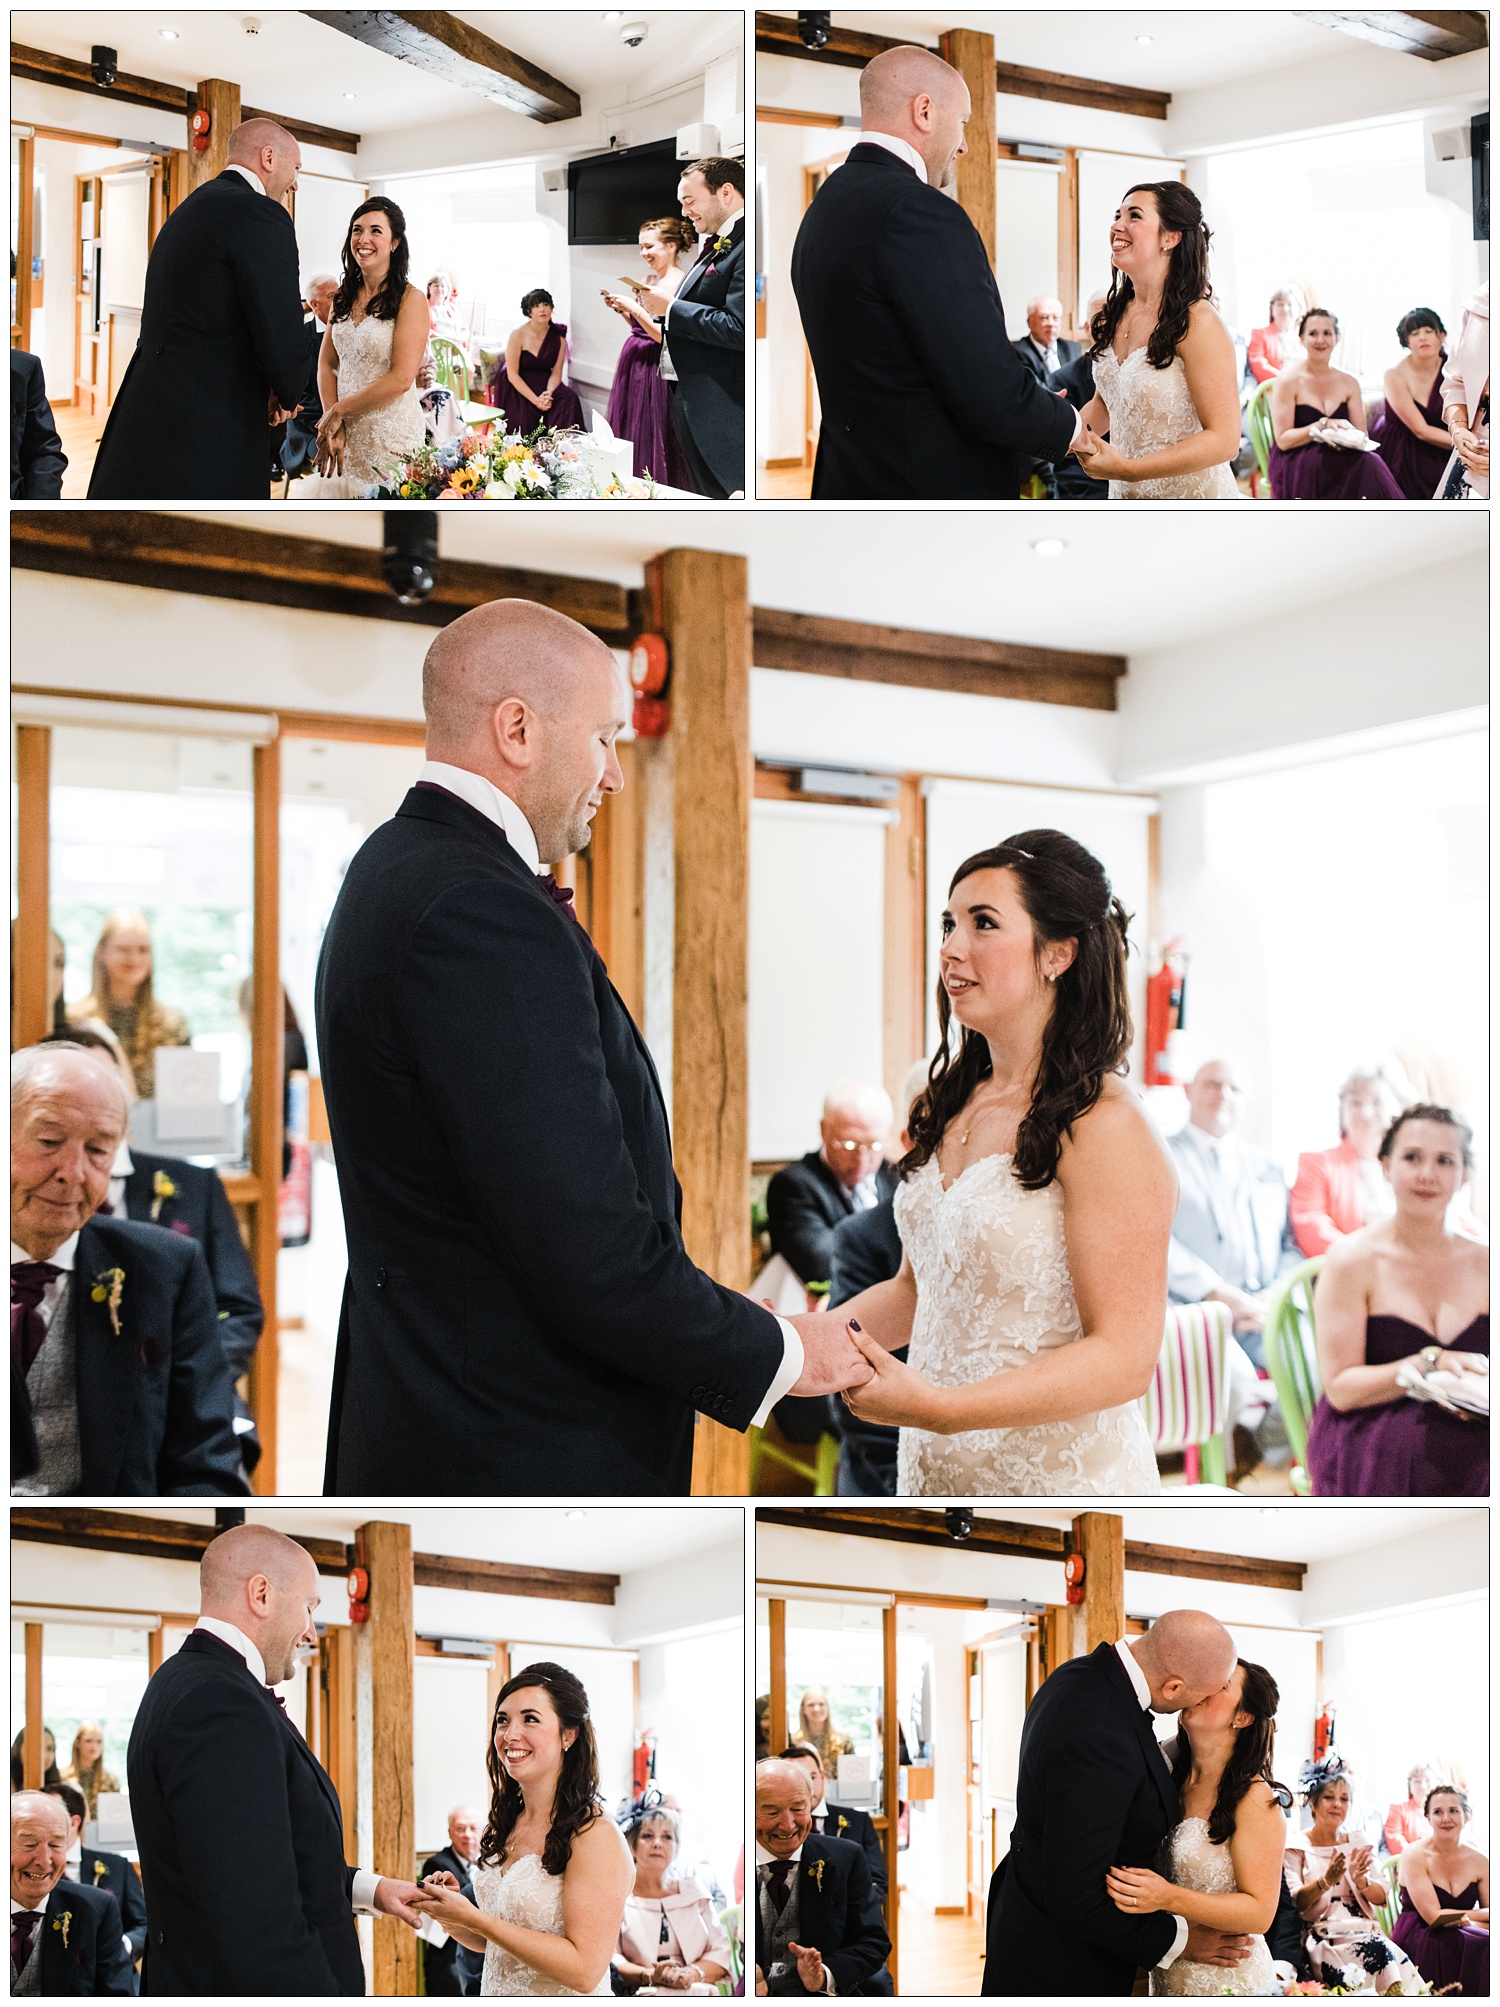 Wedding ceremony in the Rayleigh Windmill. Bride and groom are holding hands and kiss.